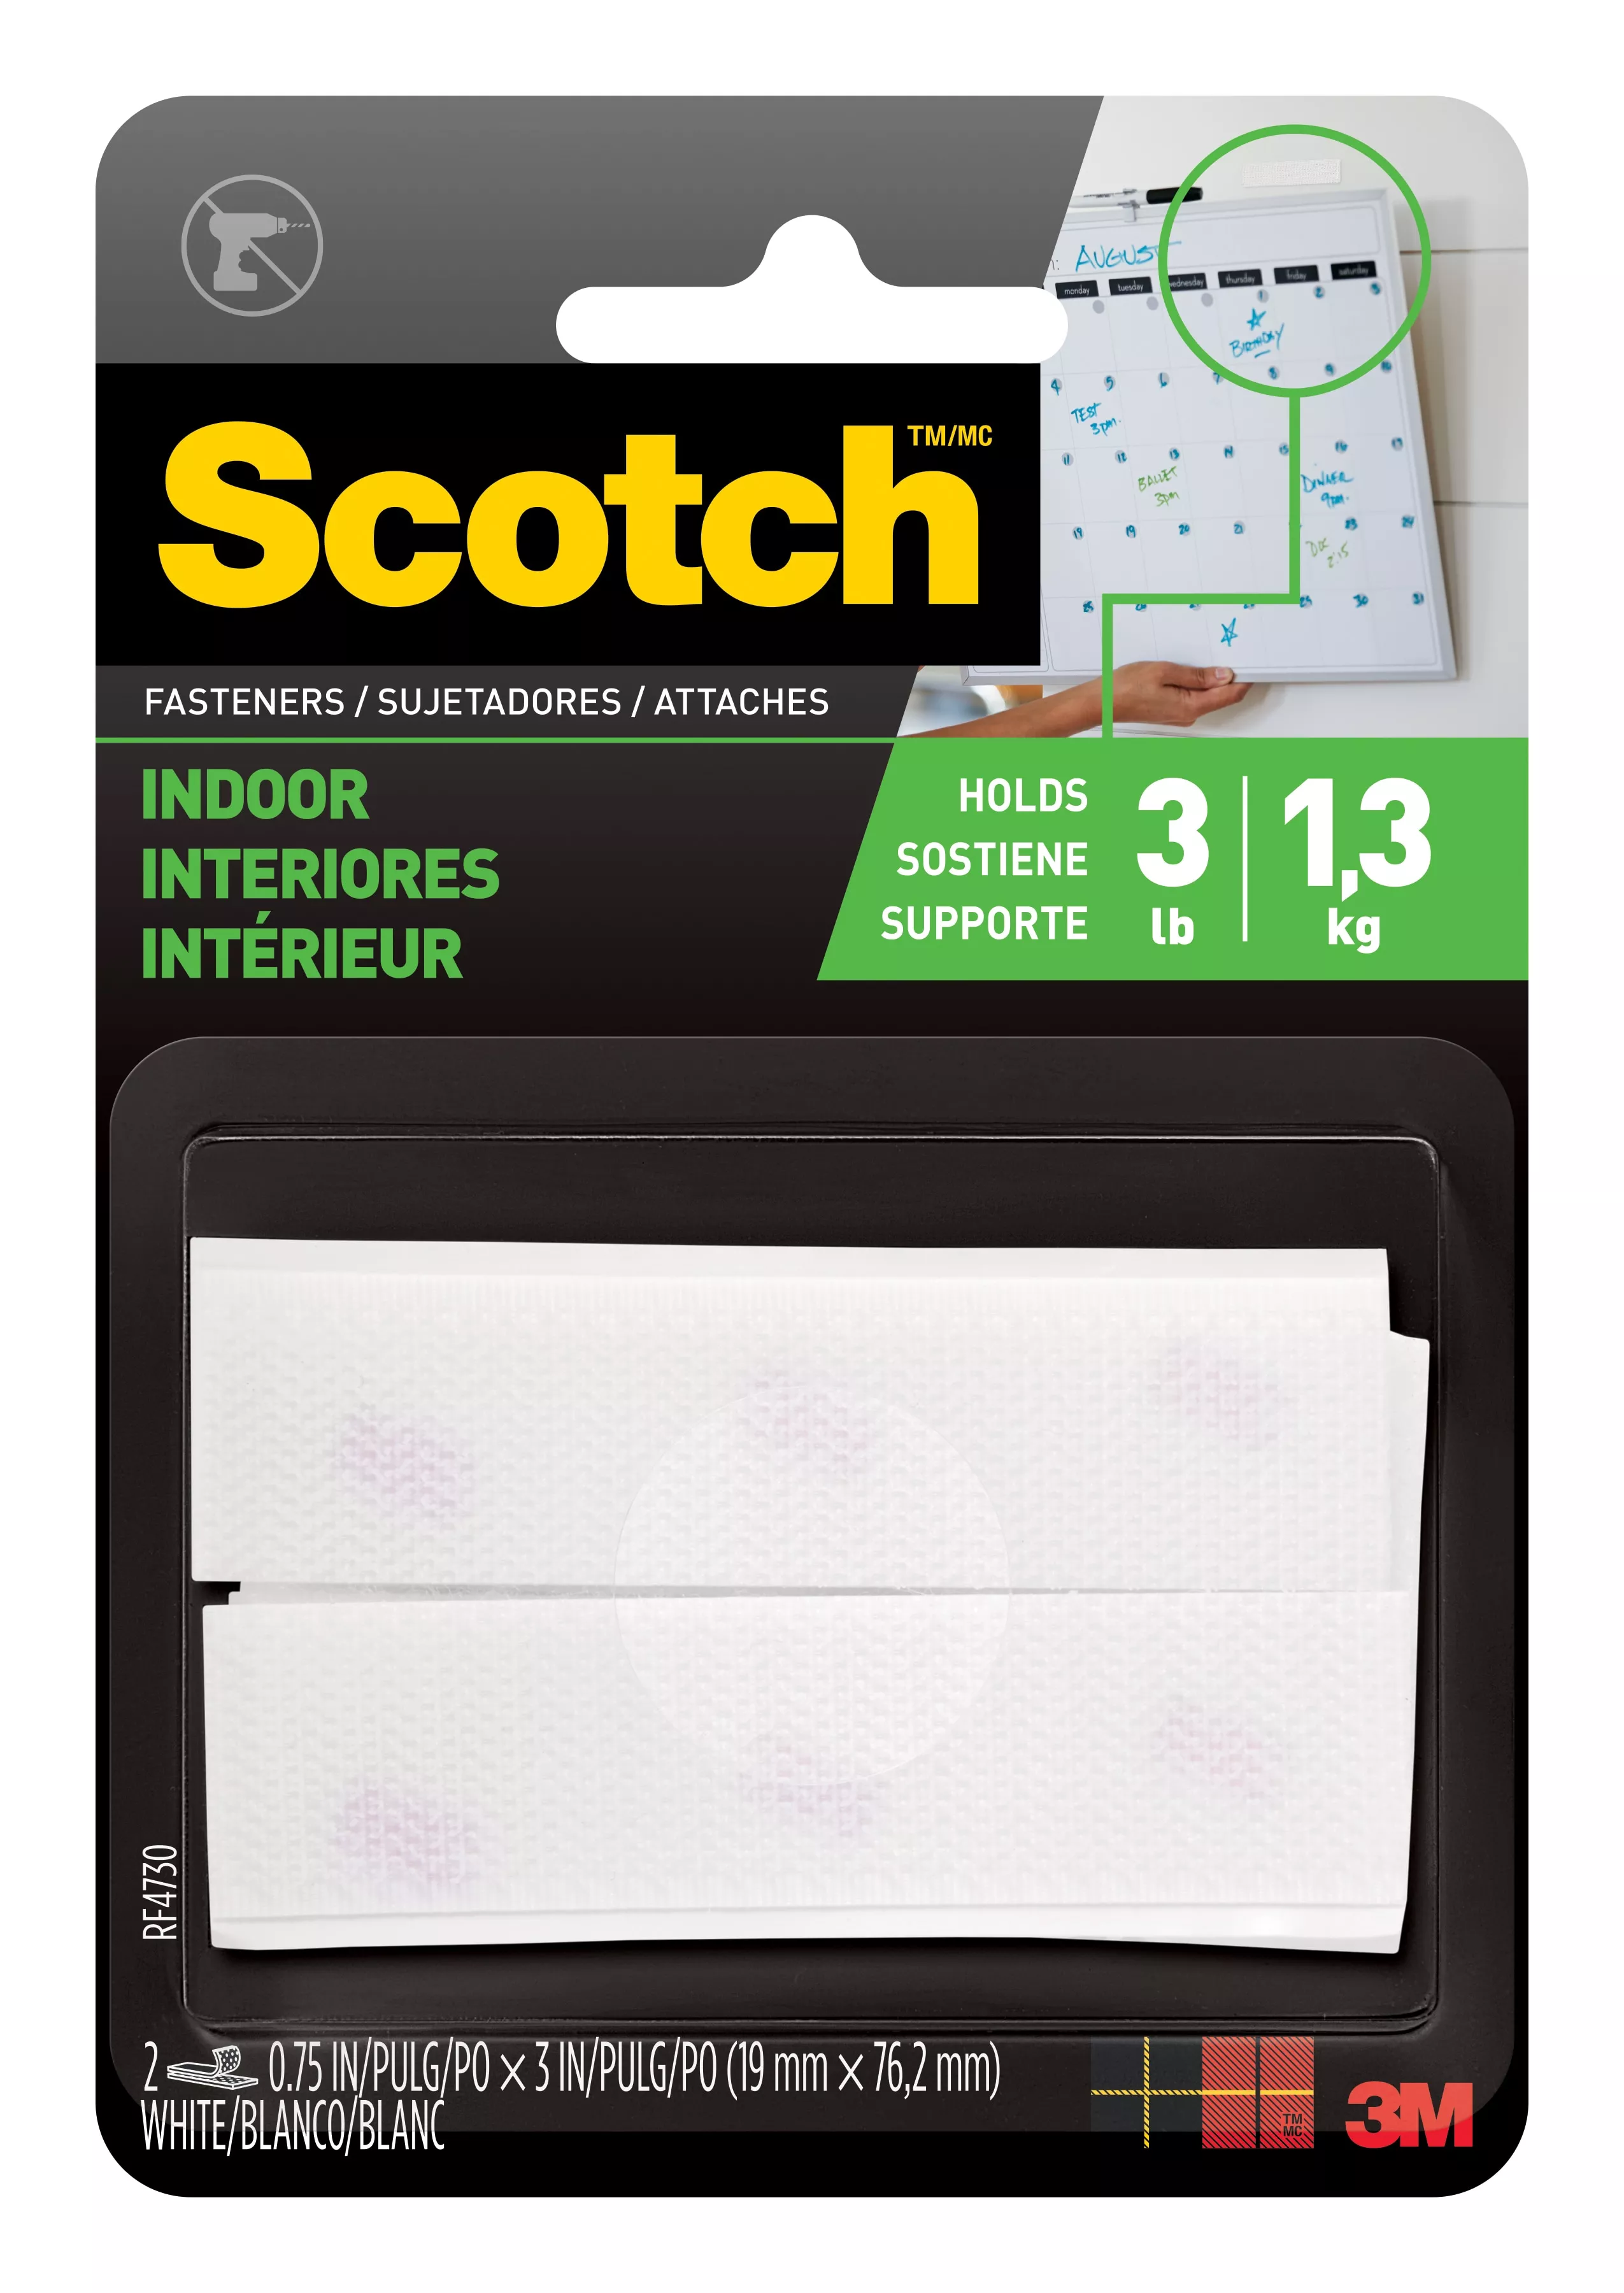 Scotch™ Indoor Fasteners RF4730, 3/4 in x 3 in (19,0 mm x 76,2 mm),
White, 2 Sets of Strips